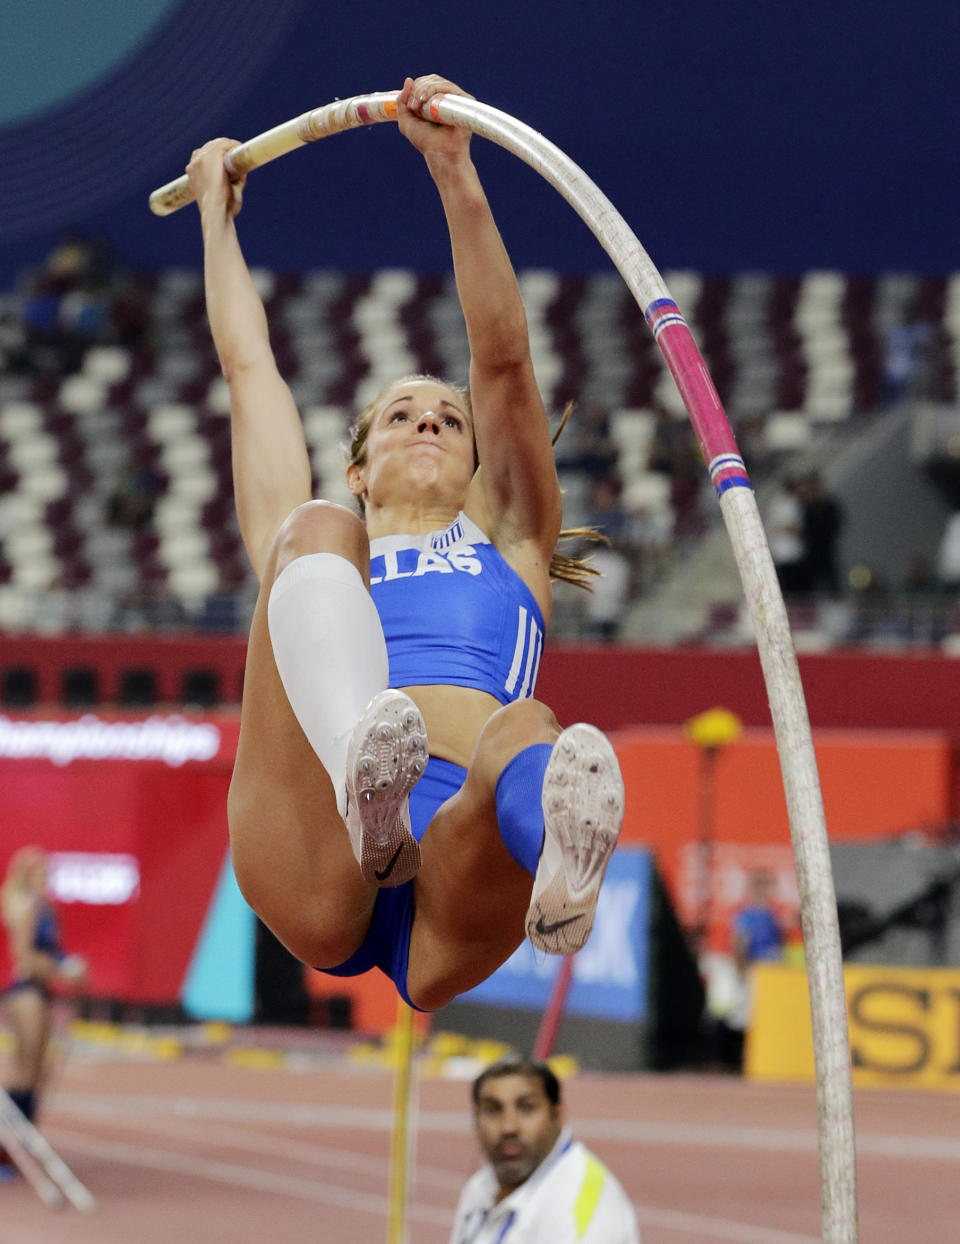 FILE - In this Sept. 29, 2019, file photo, Katerina Stefanidi, of Greece, competes in the women's pole vault final at the World Athletics Championships in Doha, Qatar. Three of the leading women’s pole vaulters will take their turn to compete in the second edition of the Ultimate Garden Clash. Katerina Stefanidi of Greece, Katie Nageotte of the United States and Alysha Newman of Canada will participate in the event but won’t be competing in their backyards since they don’t have the equipment at home. They will instead be at nearby training facilities.(AP Photo/Hassan Ammar, File)